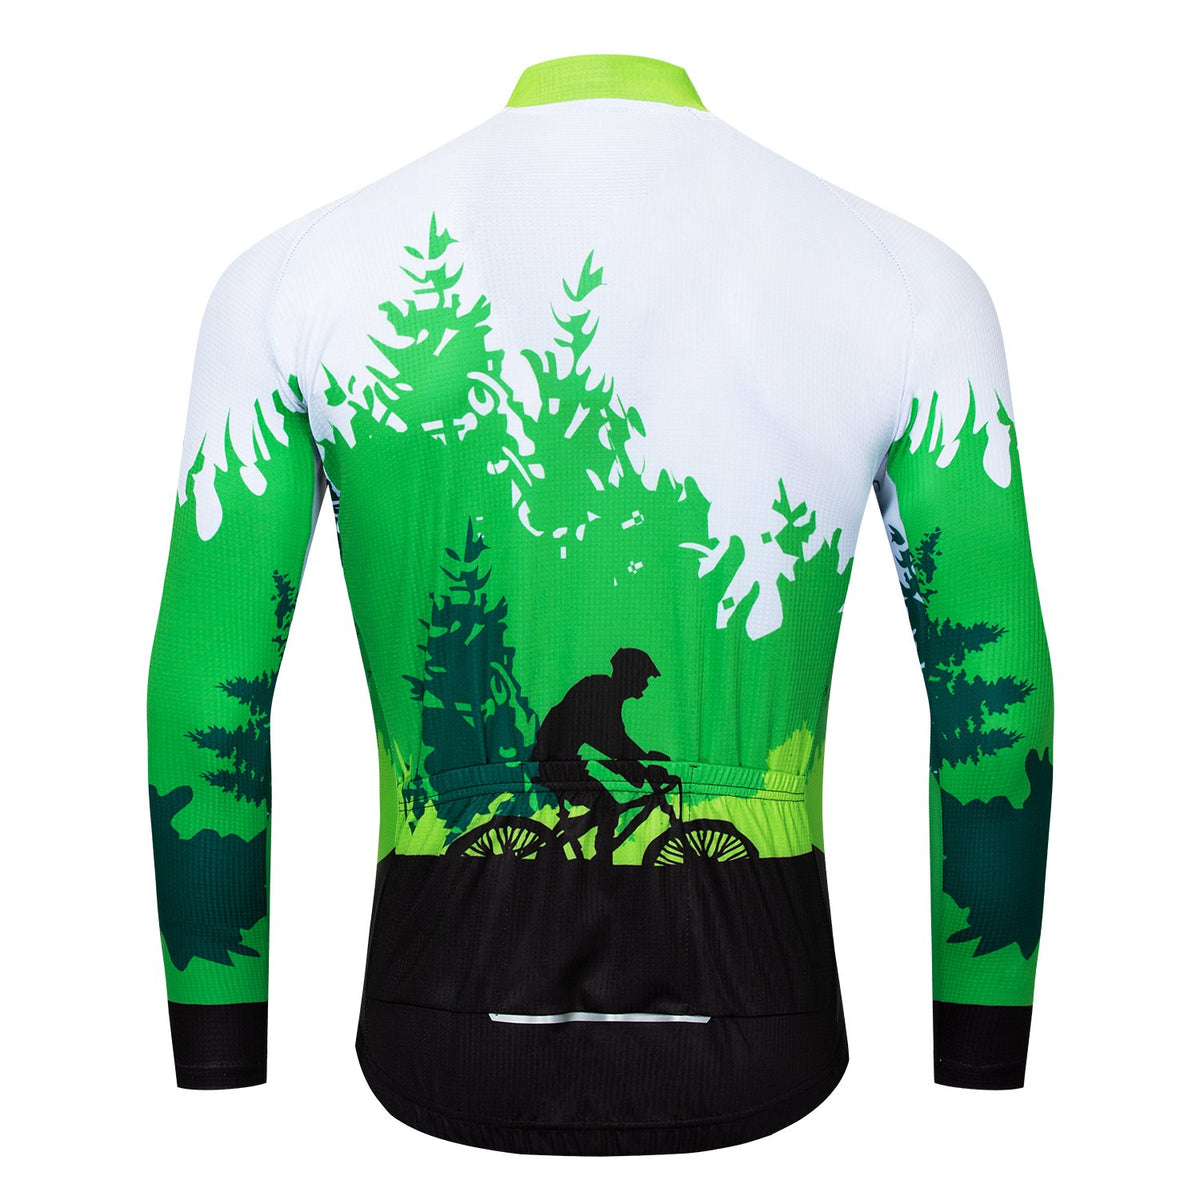 Green Forest Riding | Men's Long Sleeve Cycling Jersey